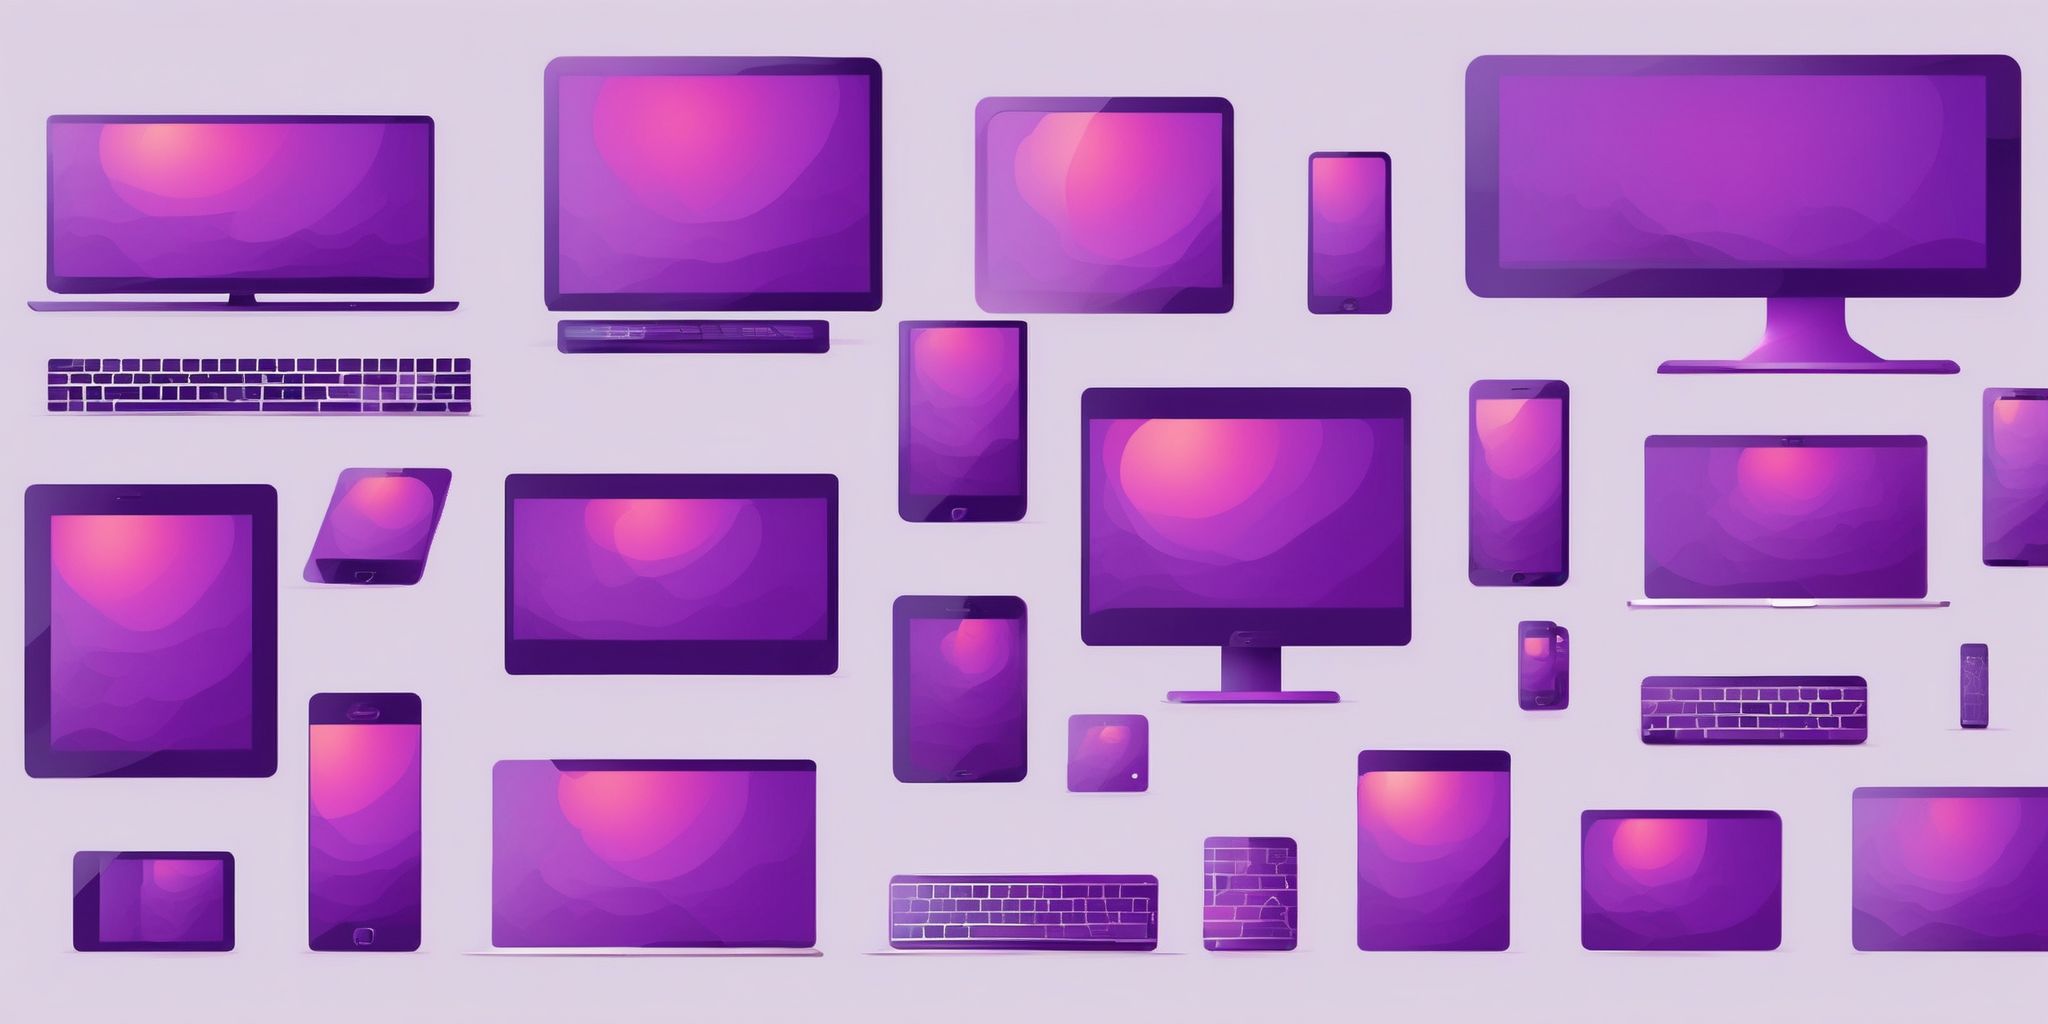 Devices in flat illustration style, colorful purple gradient colors